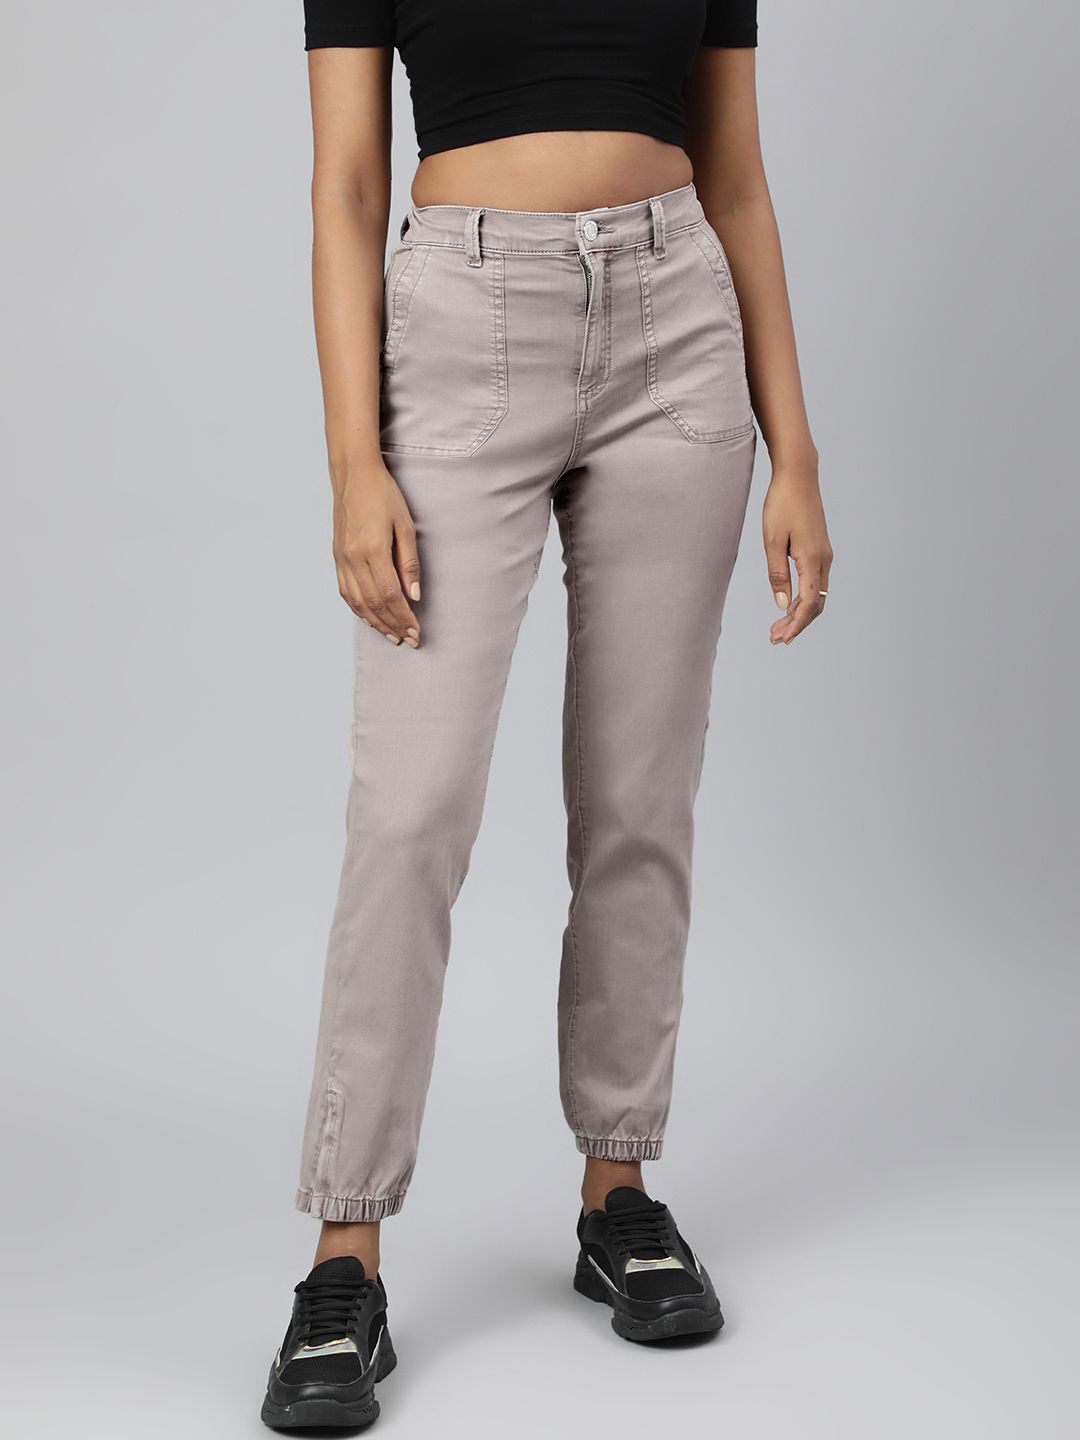 Marks & Spencer Women Grey Stretchable Joggers Price in India